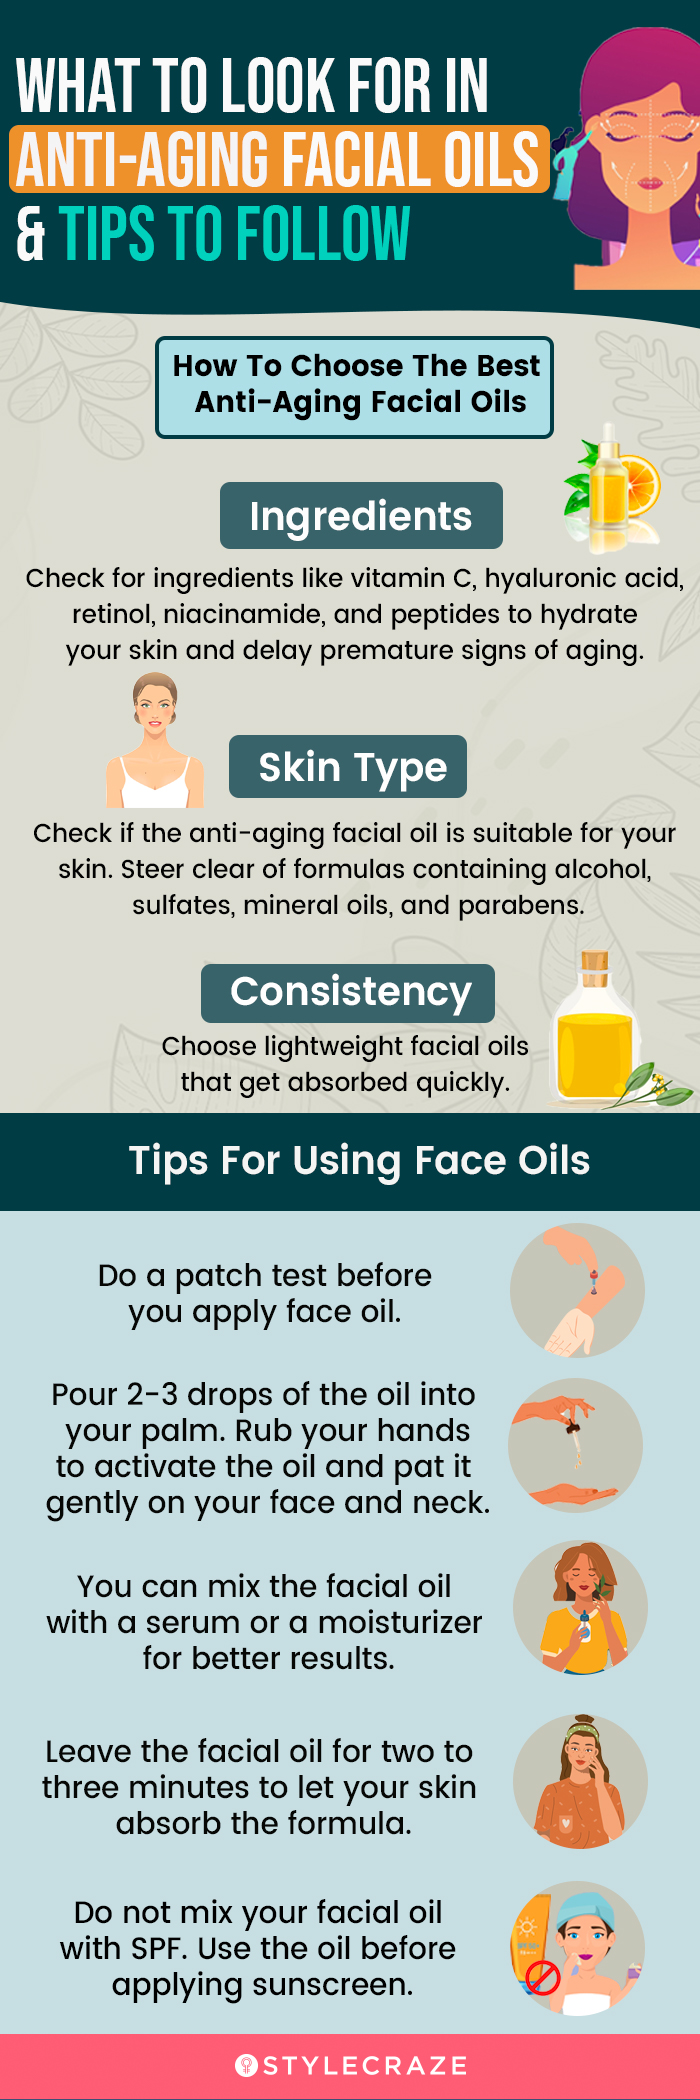 What To Look For In Anti-Aging Facial Oils (infographic)